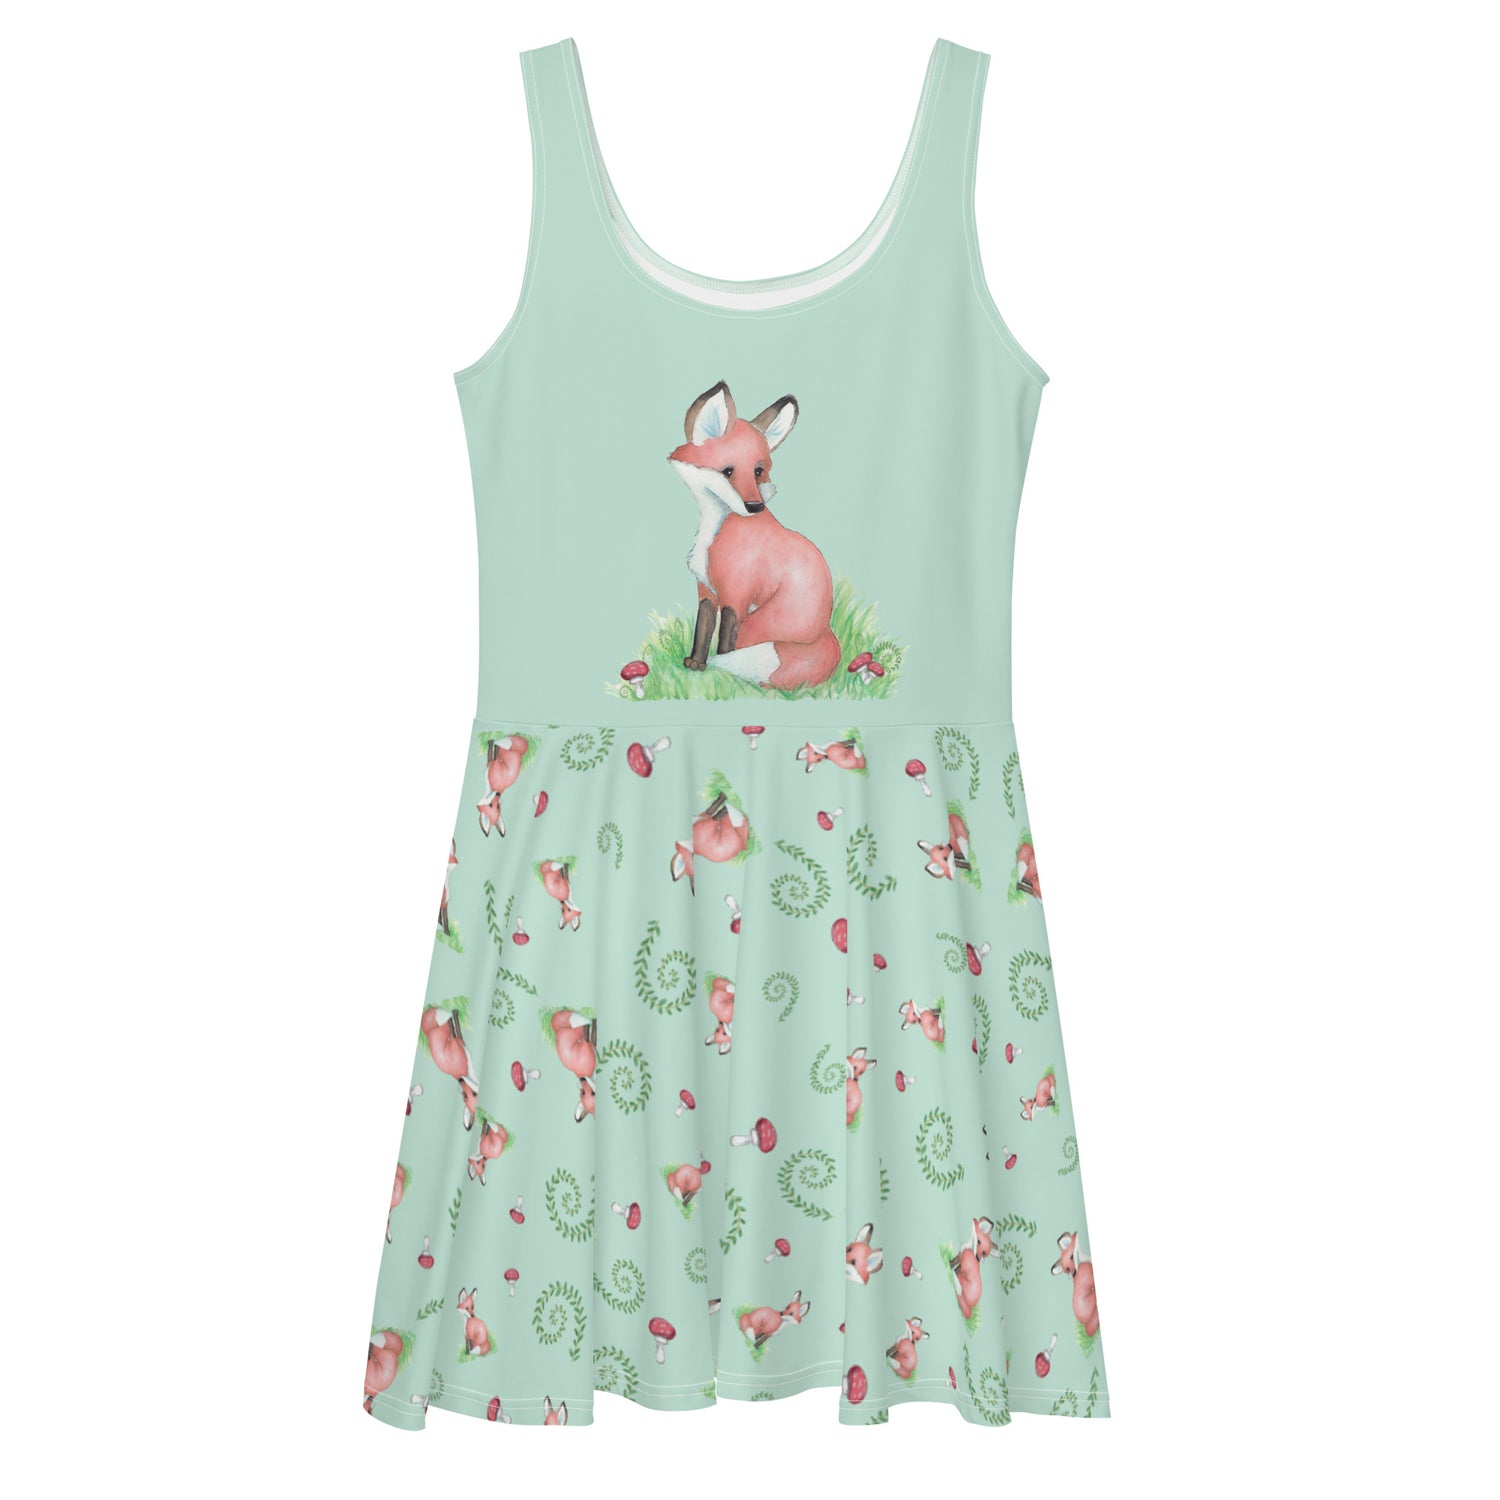 Sleeveless skater dress featuring watercolor foxes, mushrooms, and ferns on a light green fabric. Mid-thigh length flared skirt with a fitted elastic waist.